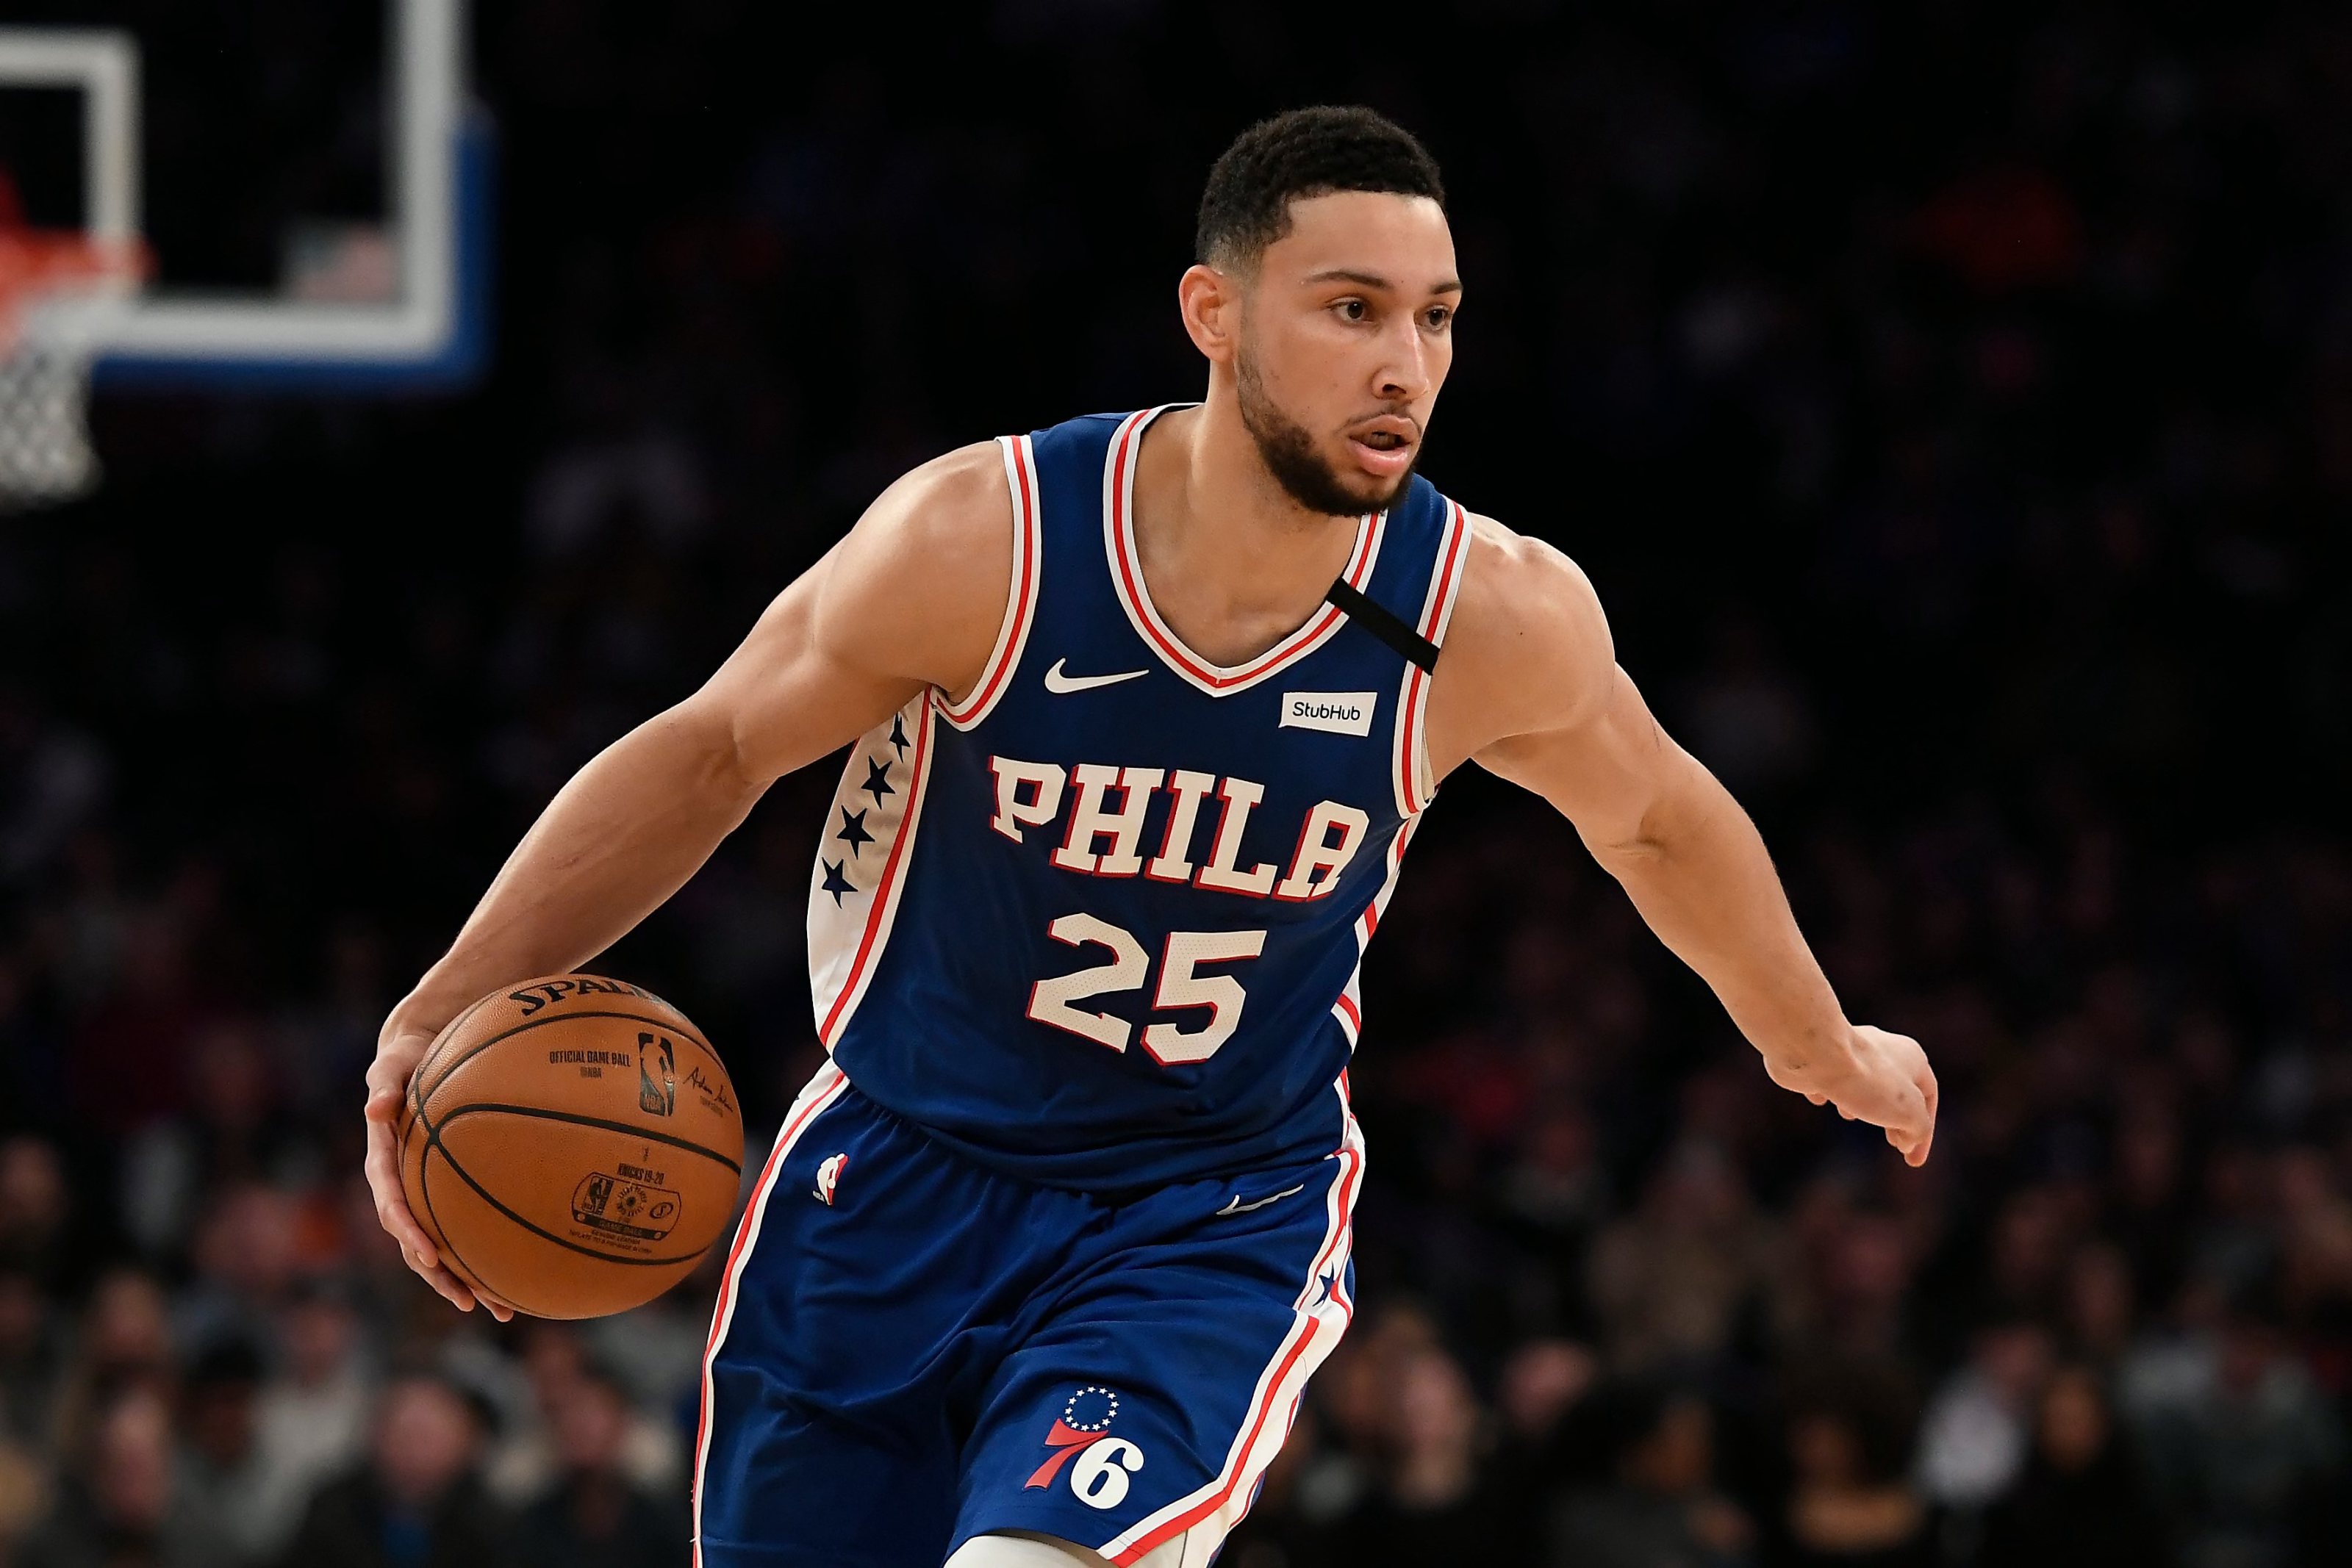 Philadelphia 76ers: Let Ben Simmons develop on his own time